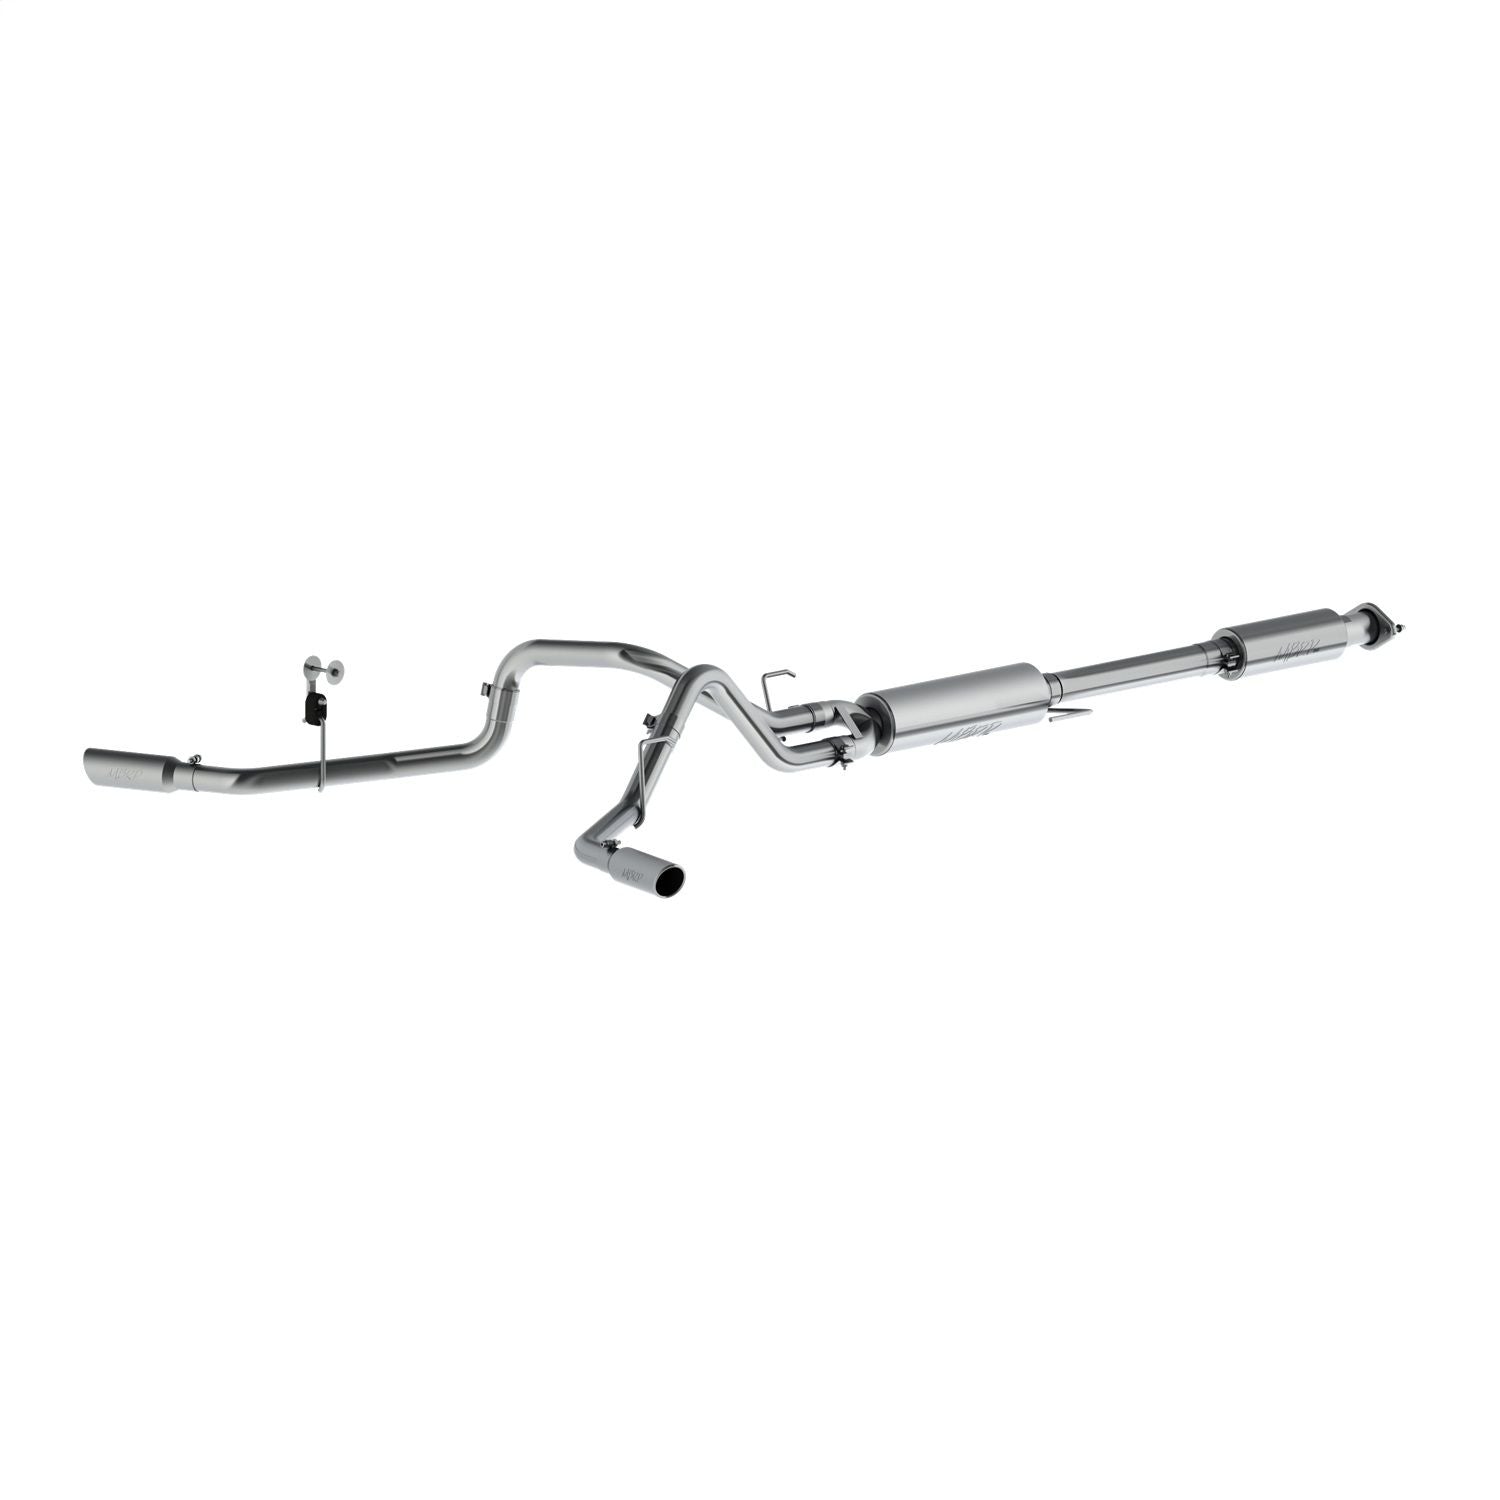 MBRP S5257409 - 2 1/2" Cat Back, Dual Side Exit, T409, 2015 - 2020 Ford F-150 5.0L